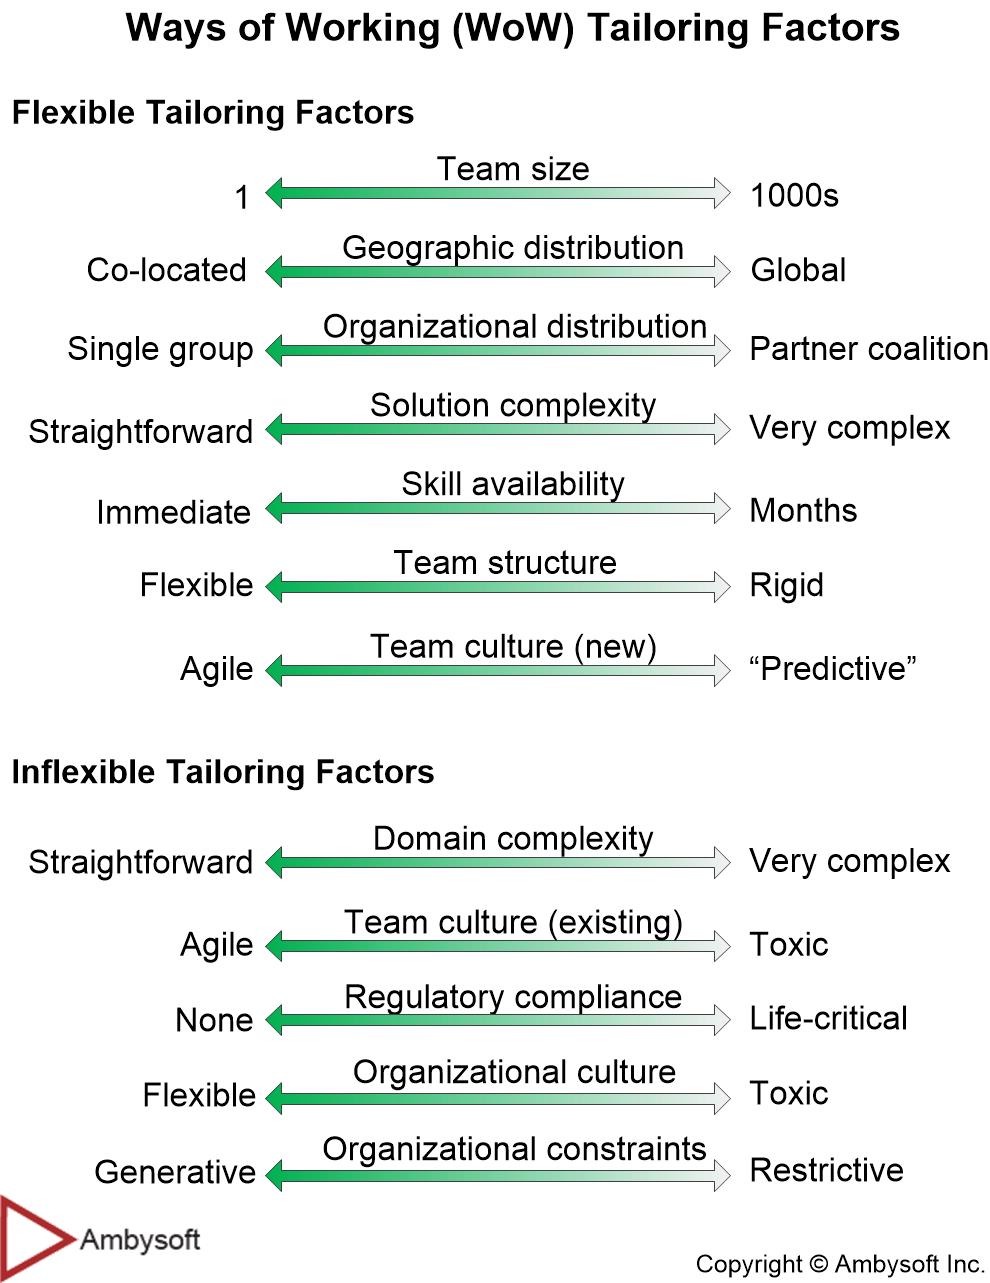 Tailoring factors for Ways of Working (WoW)